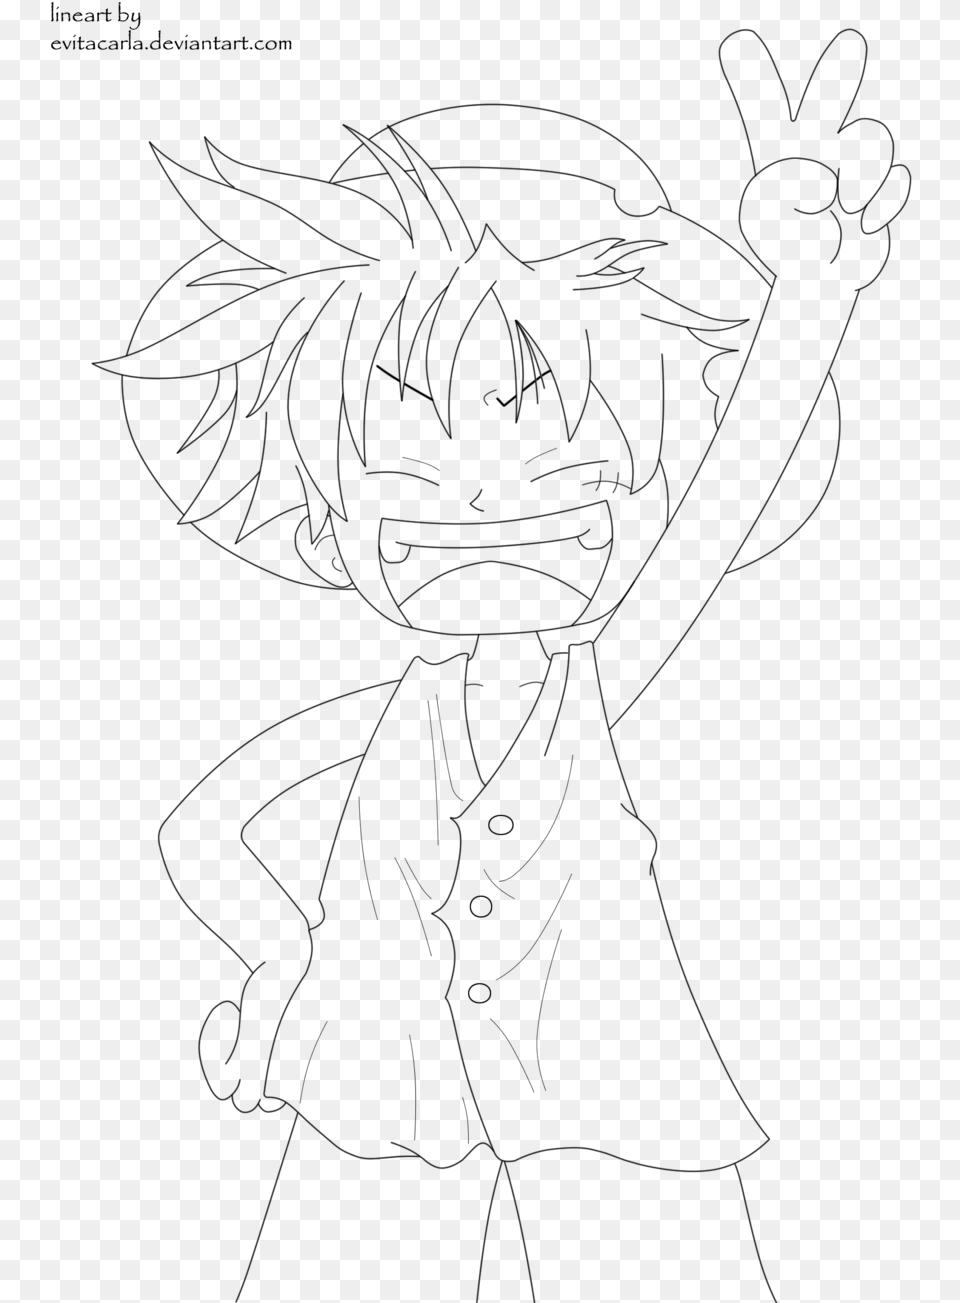 One Piece Fan Art Chibi Luffy Lineart One Piece By Line Art, Gray Free Transparent Png